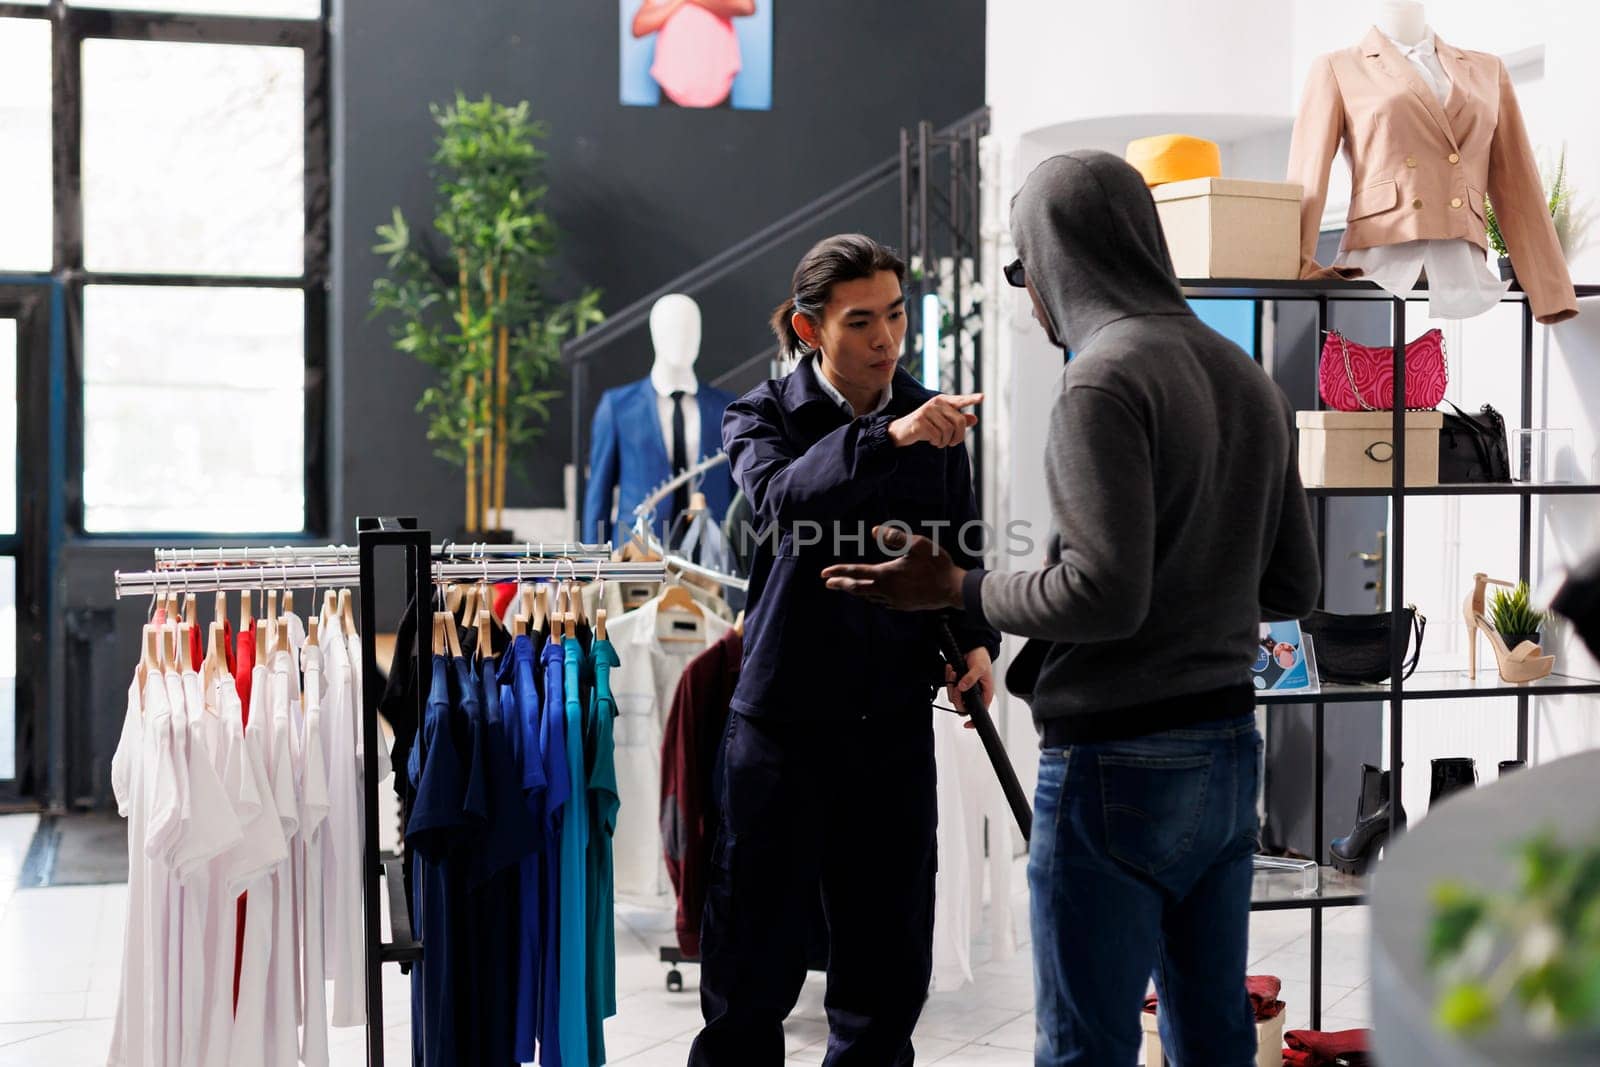 Thief was caugh robbing store by worker, asking him to return stylish clothes or will call the police in clothing store. African american robber trying to steal fashionable merchandise